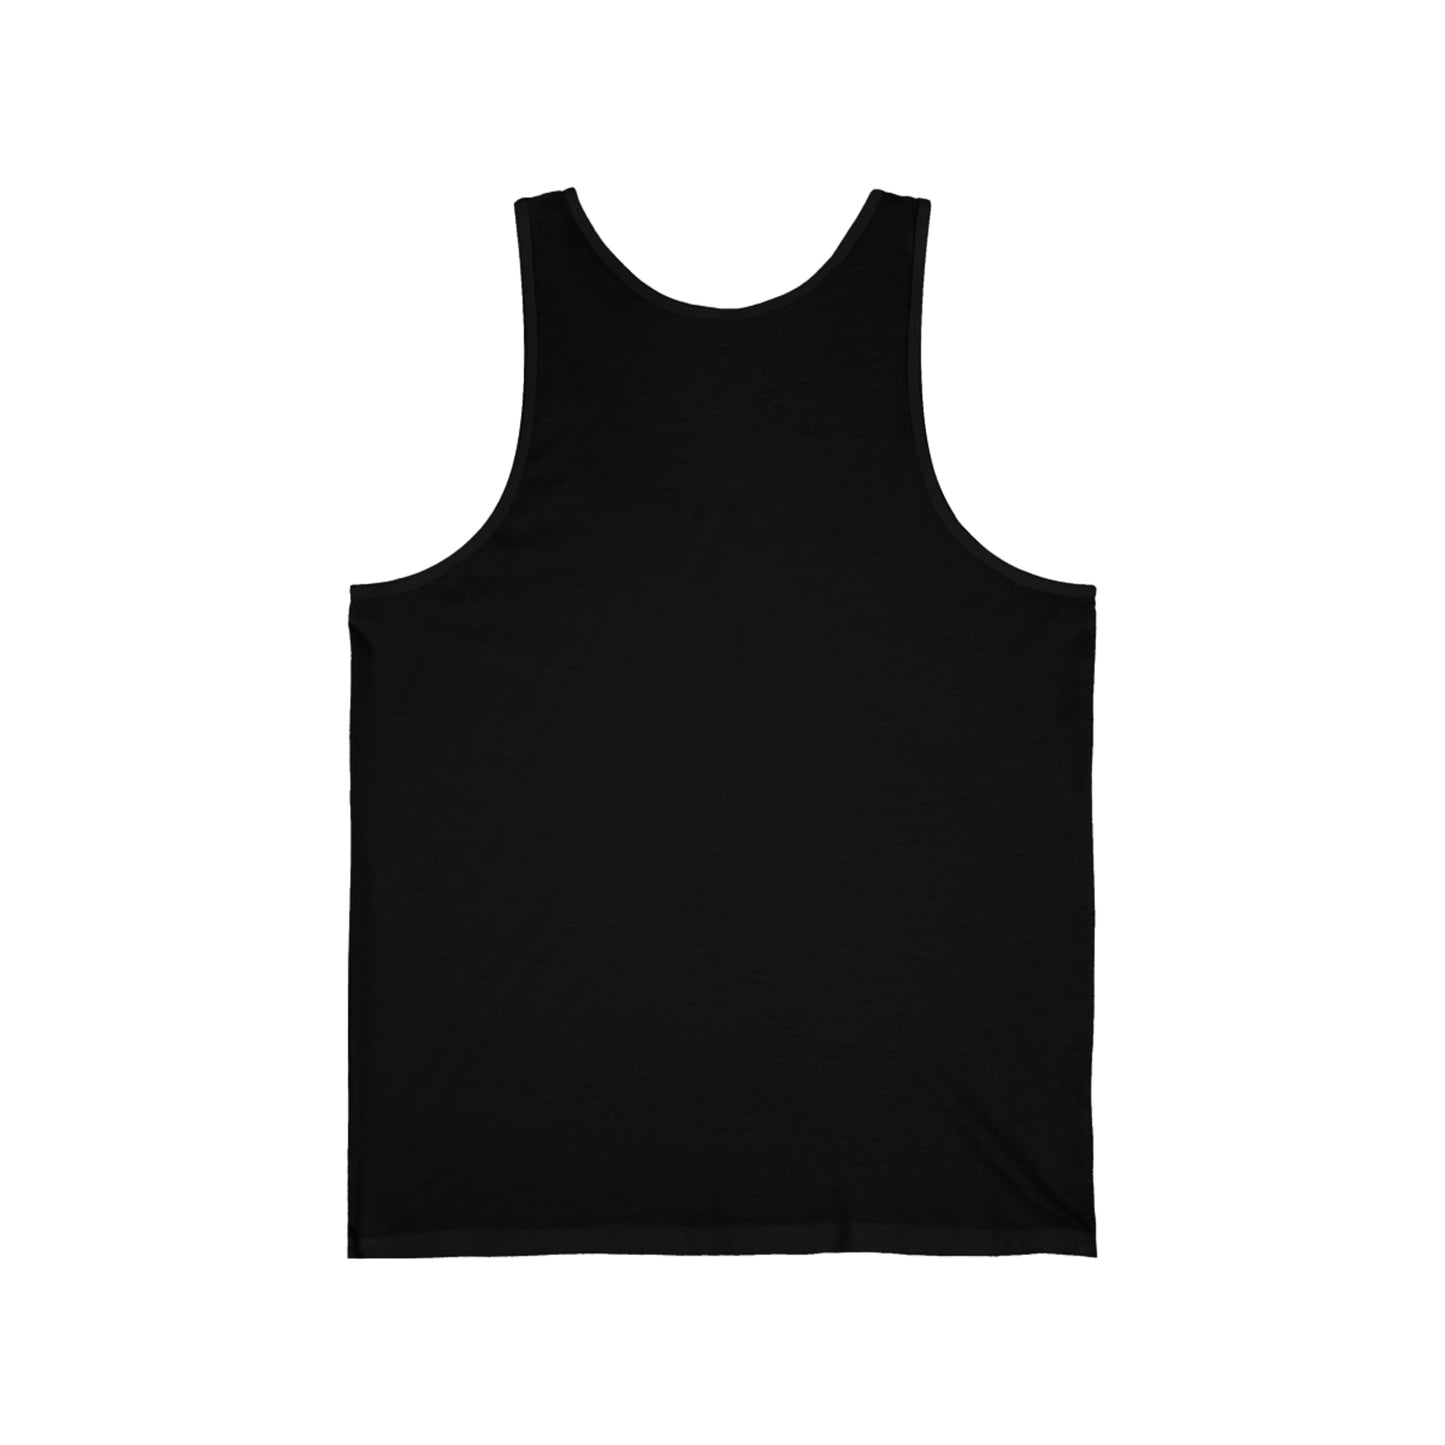 New Orleans Tank Top